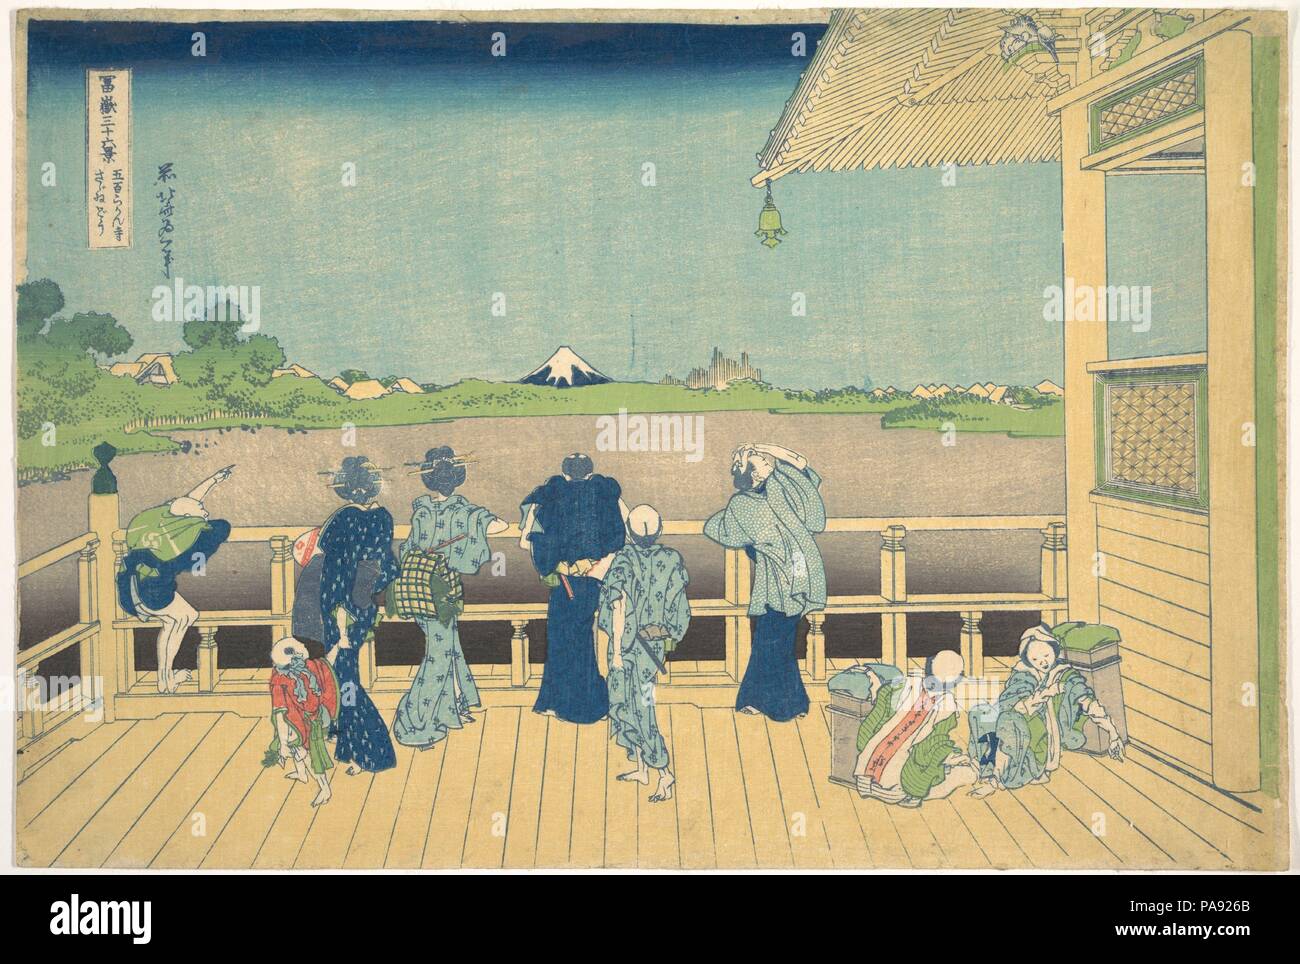 Sazai Hall at the Temple of the Five Hundred Arhats (Gohyaku Rakanji Sazaido), from the series Thirty-six Views of Mount Fuji (Fugaku sanjurokkei). Artist: Katsushika Hokusai (Japanese, Tokyo (Edo) 1760-1849 Tokyo (Edo)). Culture: Japan. Dimensions: Oban 10 1/4 x 15 1/4 in. (26 x 38.7 cm). Date: ca. 1830-32.  The Sazaido (literally, Turban-shell Tower, owing to its spiral staircase) is a three-story tower that was built in 1741 as a temple dedicated to the five hundred Rakan, or arhats, legendary disciples of Buddha. Men and women admire the view of Mount Fuji across the marshes from the templ Stock Photo